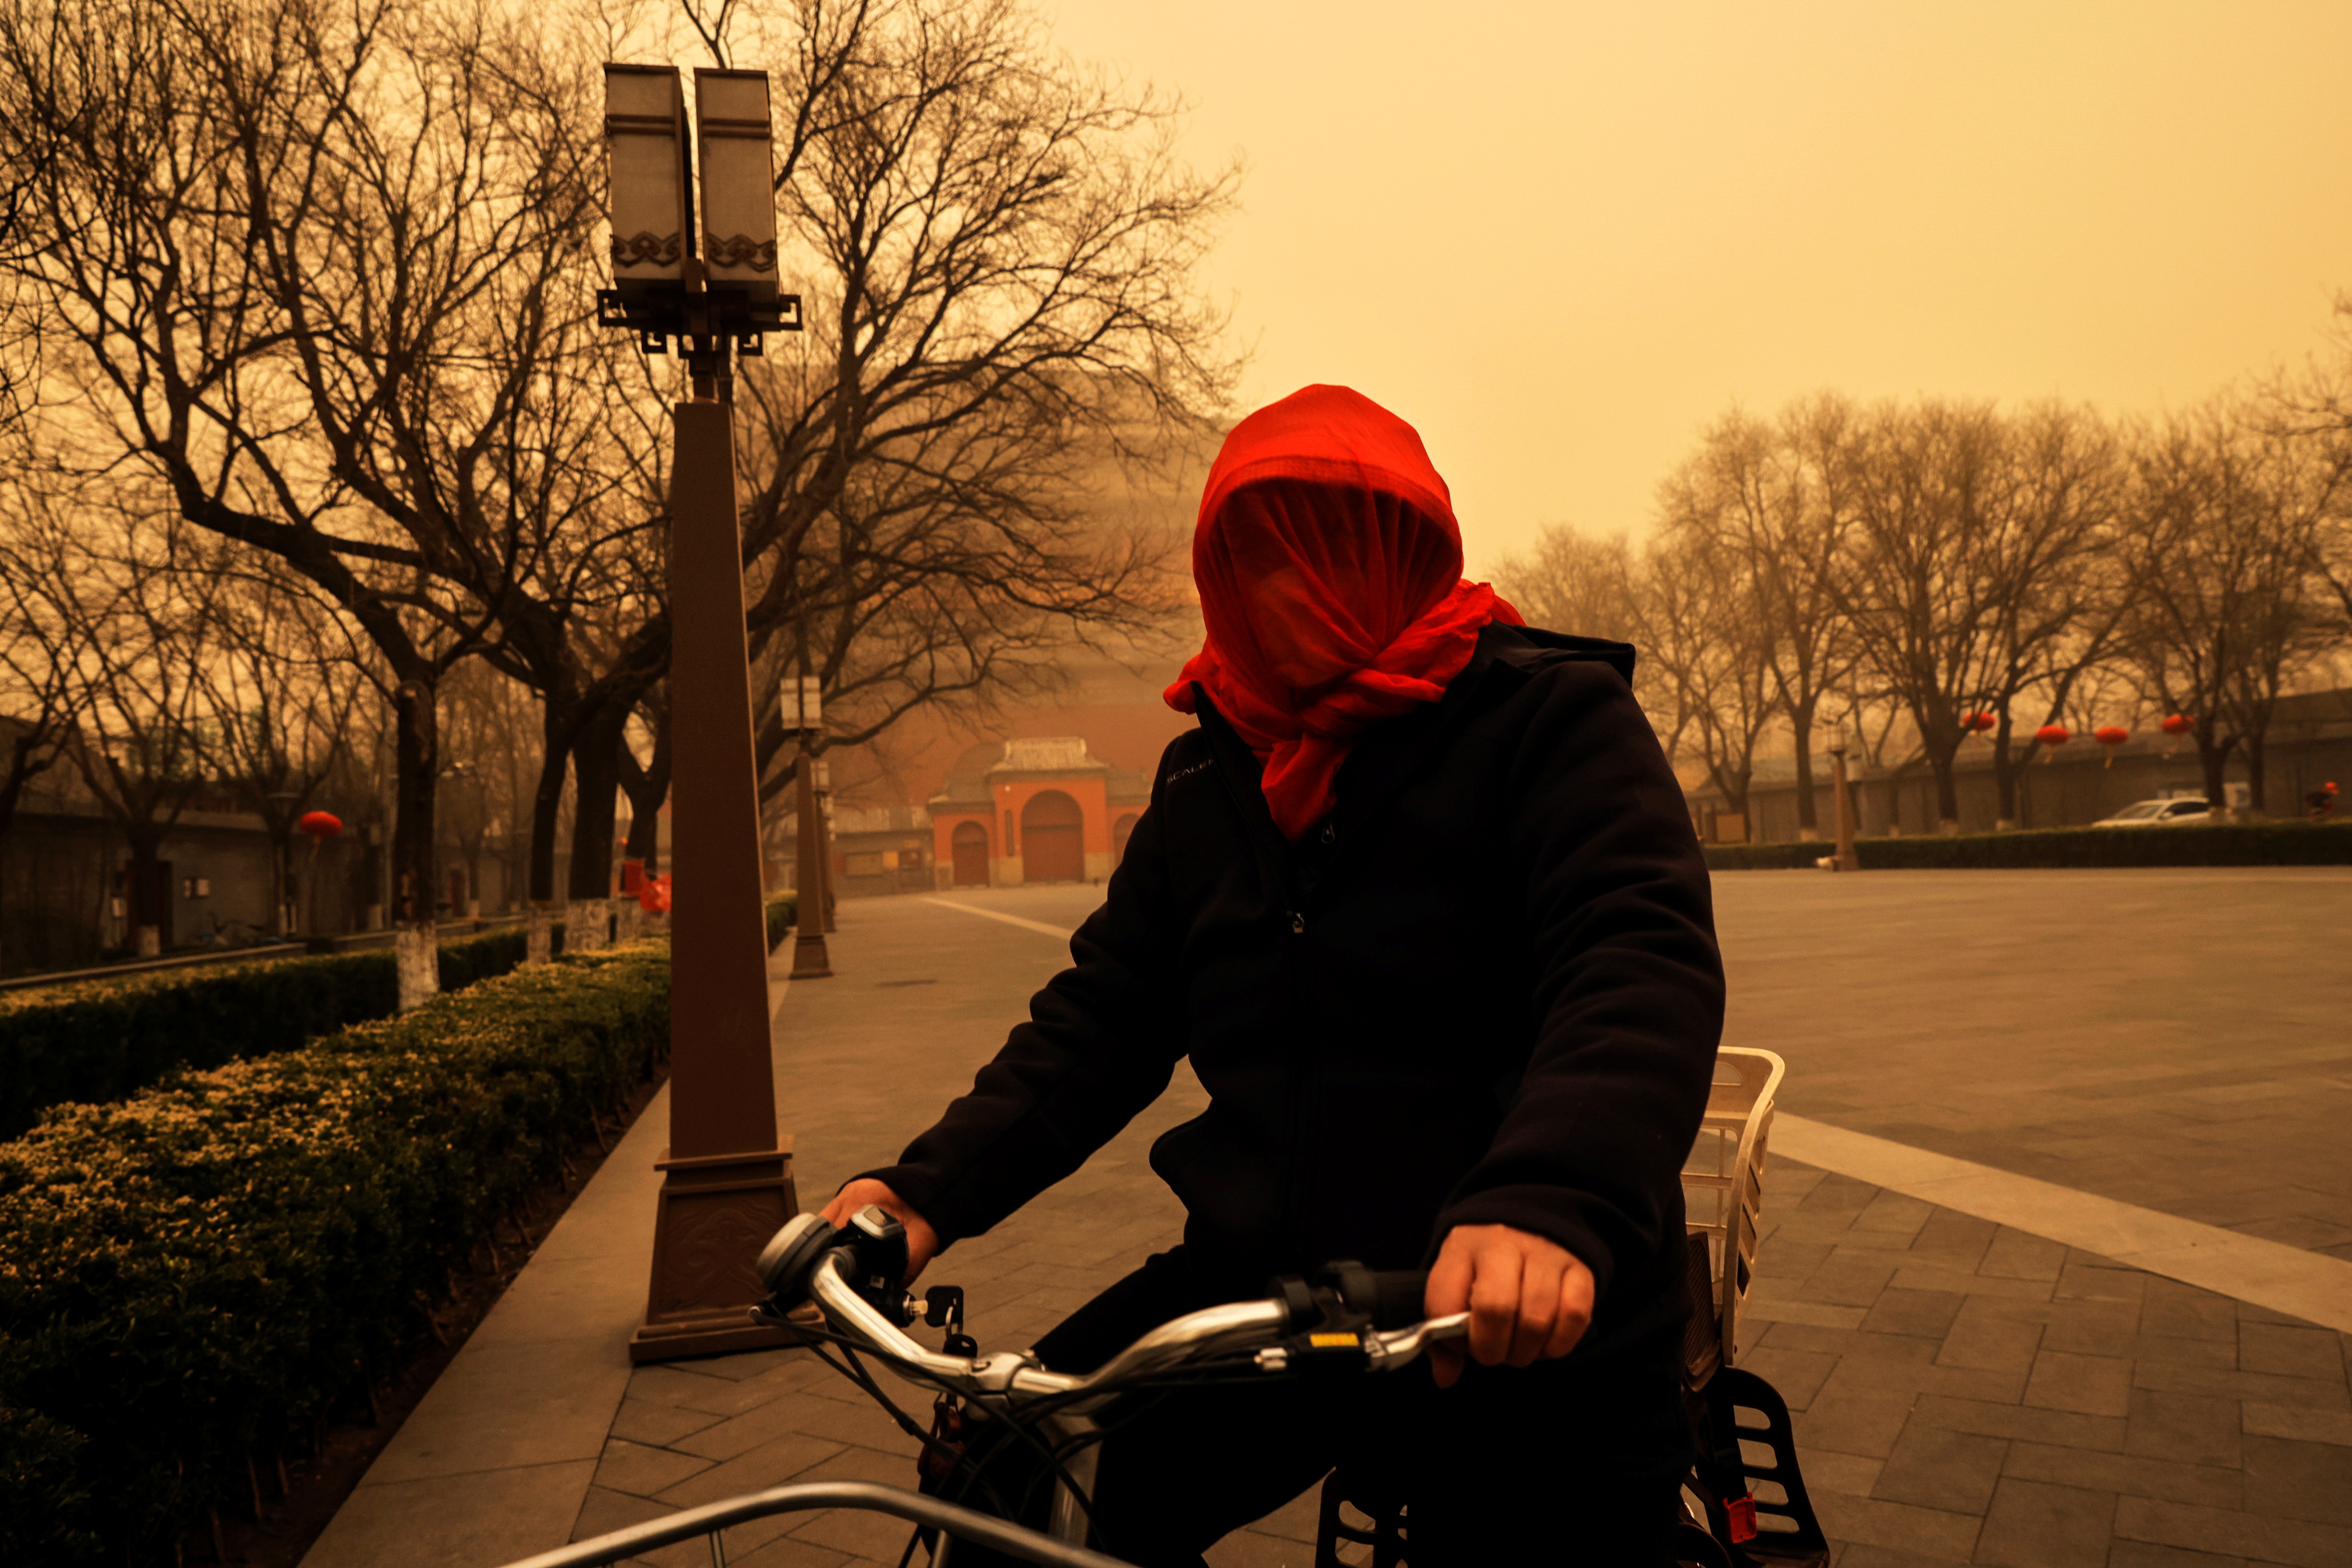 Sandstorm during morning rush hour in Beijing, China